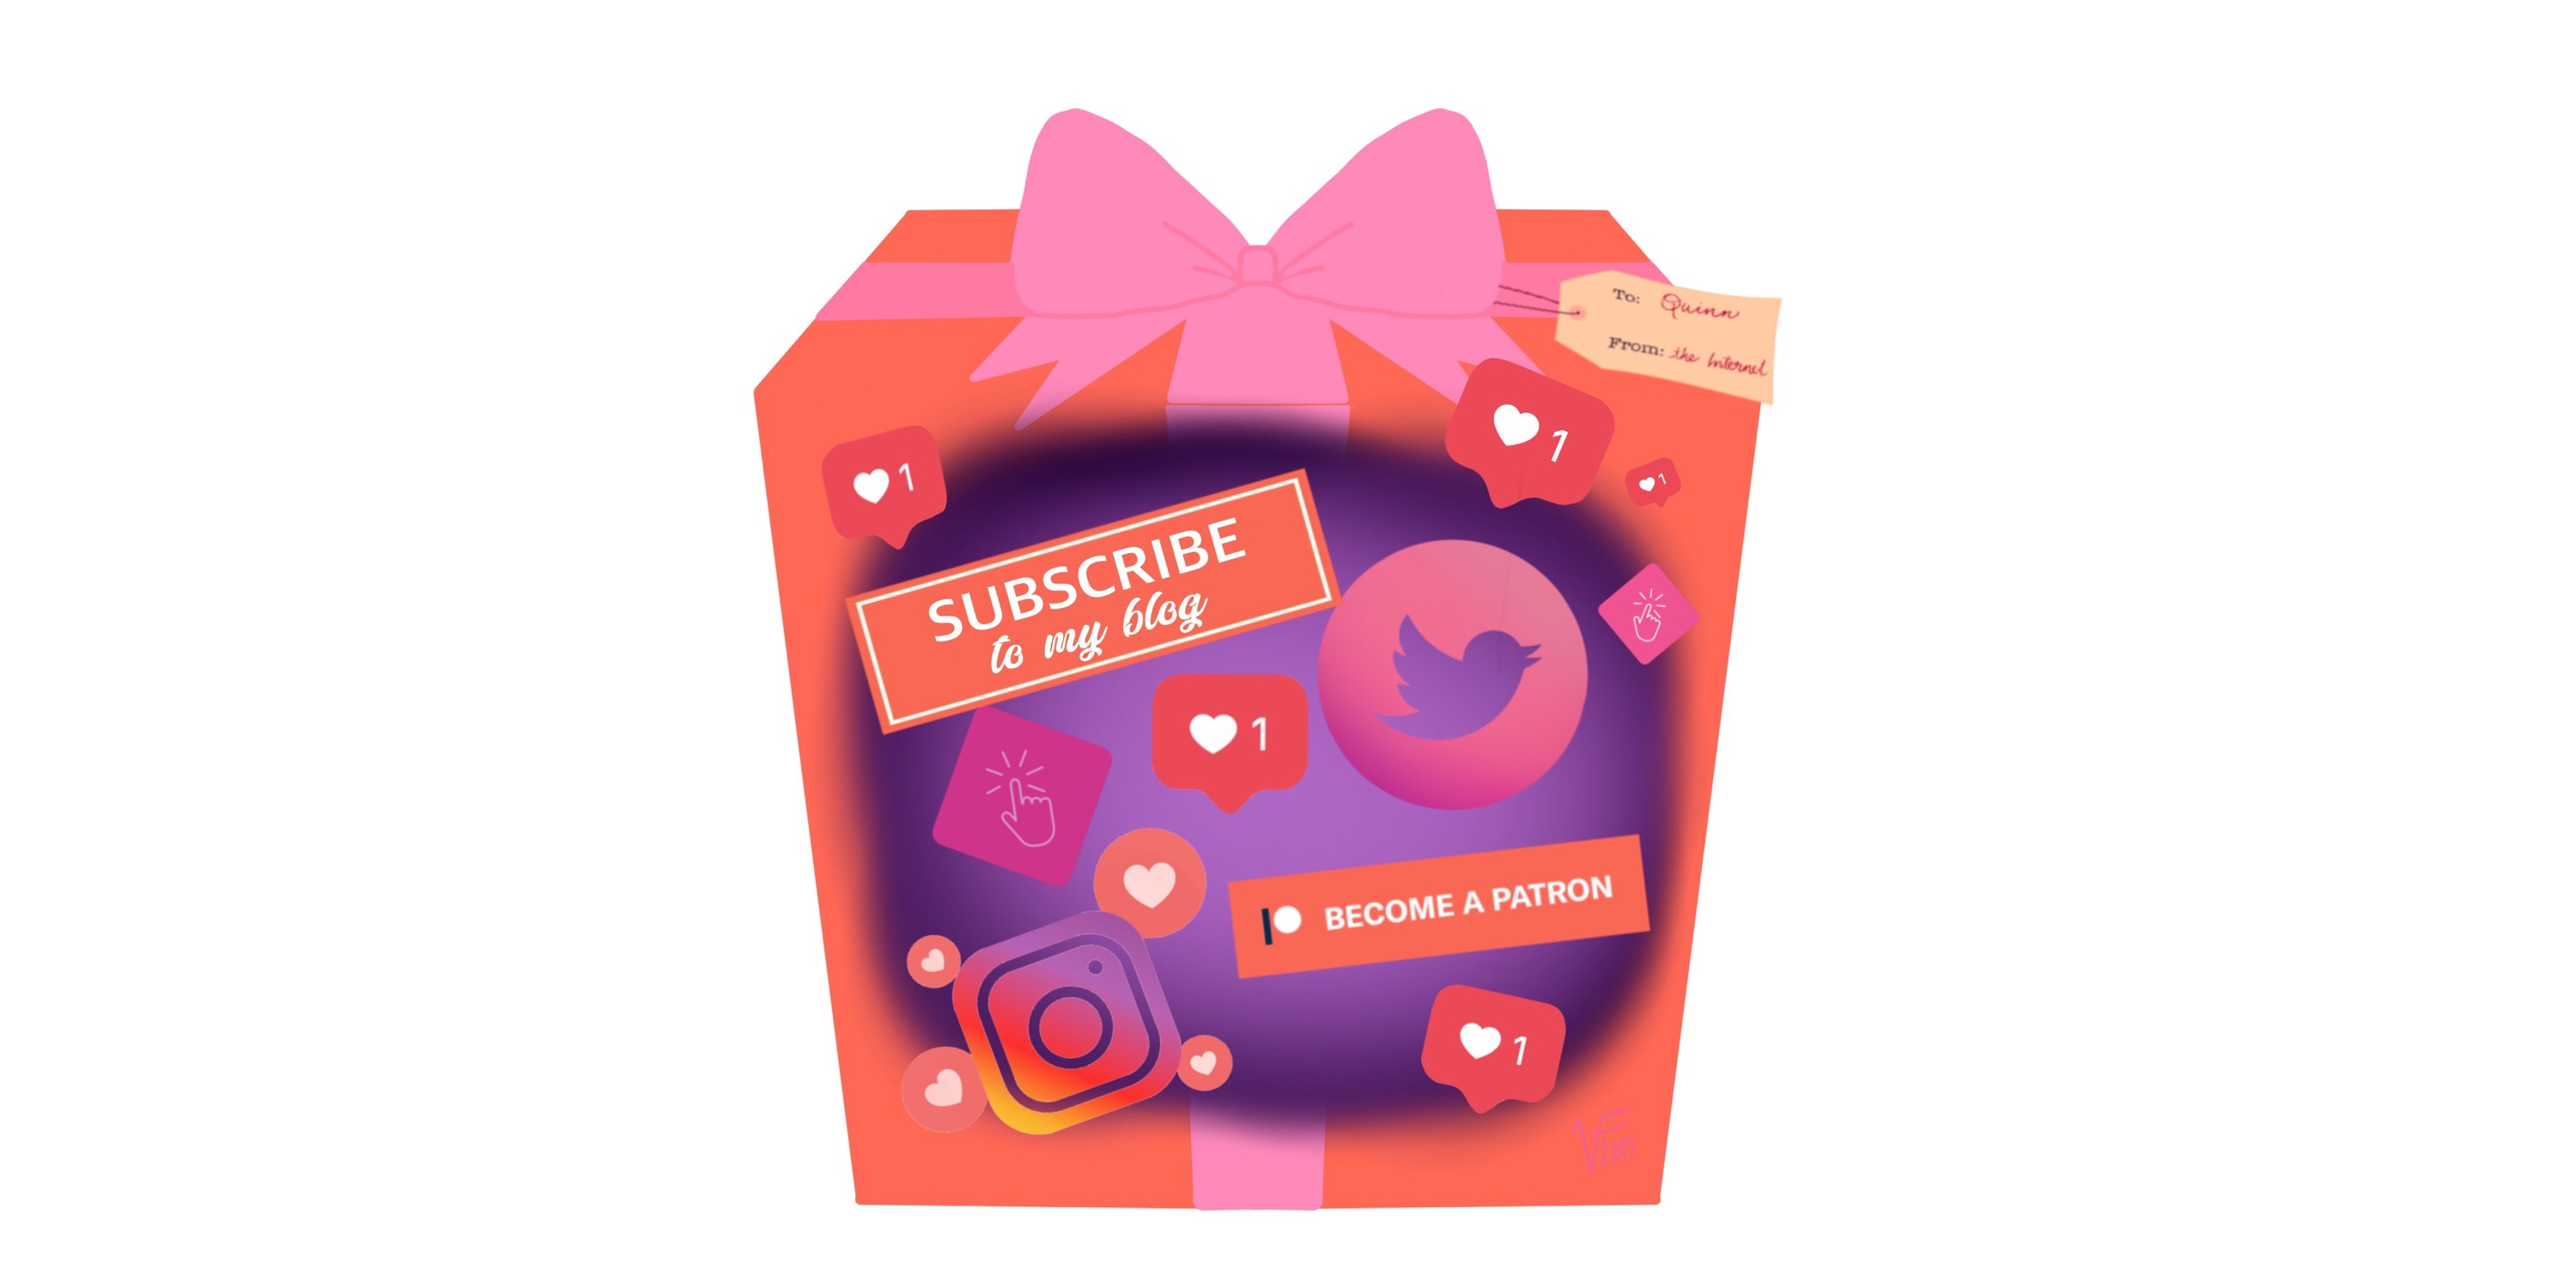 A pink-wrapped gift box filled with buttons and Instagram likes and other social media shares. Artwork.